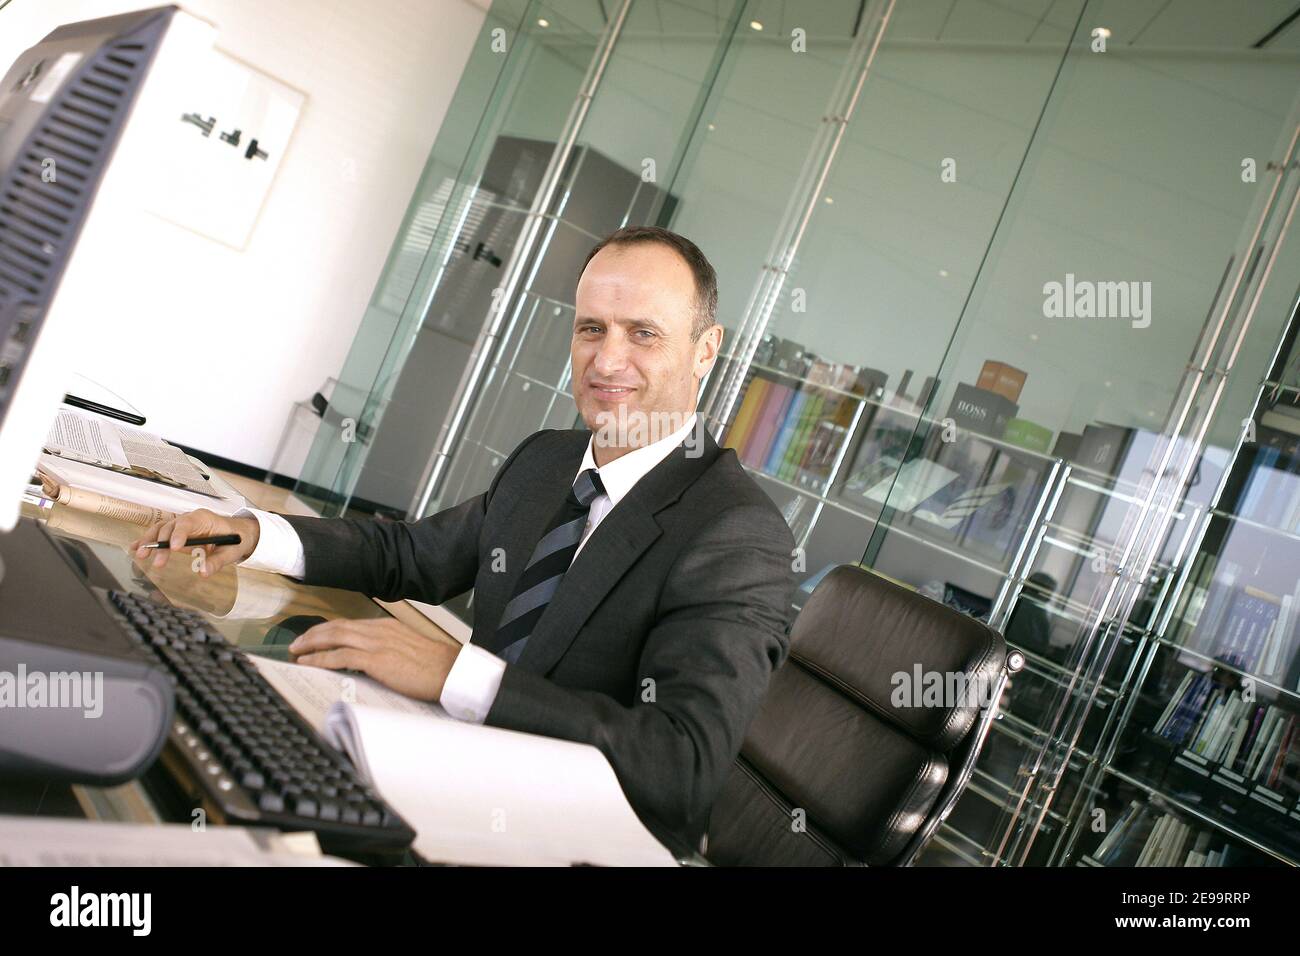 Hugo Boss Chairman, Bruno Salzer, poses in his office at its headquarters  in Metzingen near Stuttgart, Germany on January 31, 2006. Photo by Thierry  Orban/ABACAPRESS.COM Stock Photo - Alamy